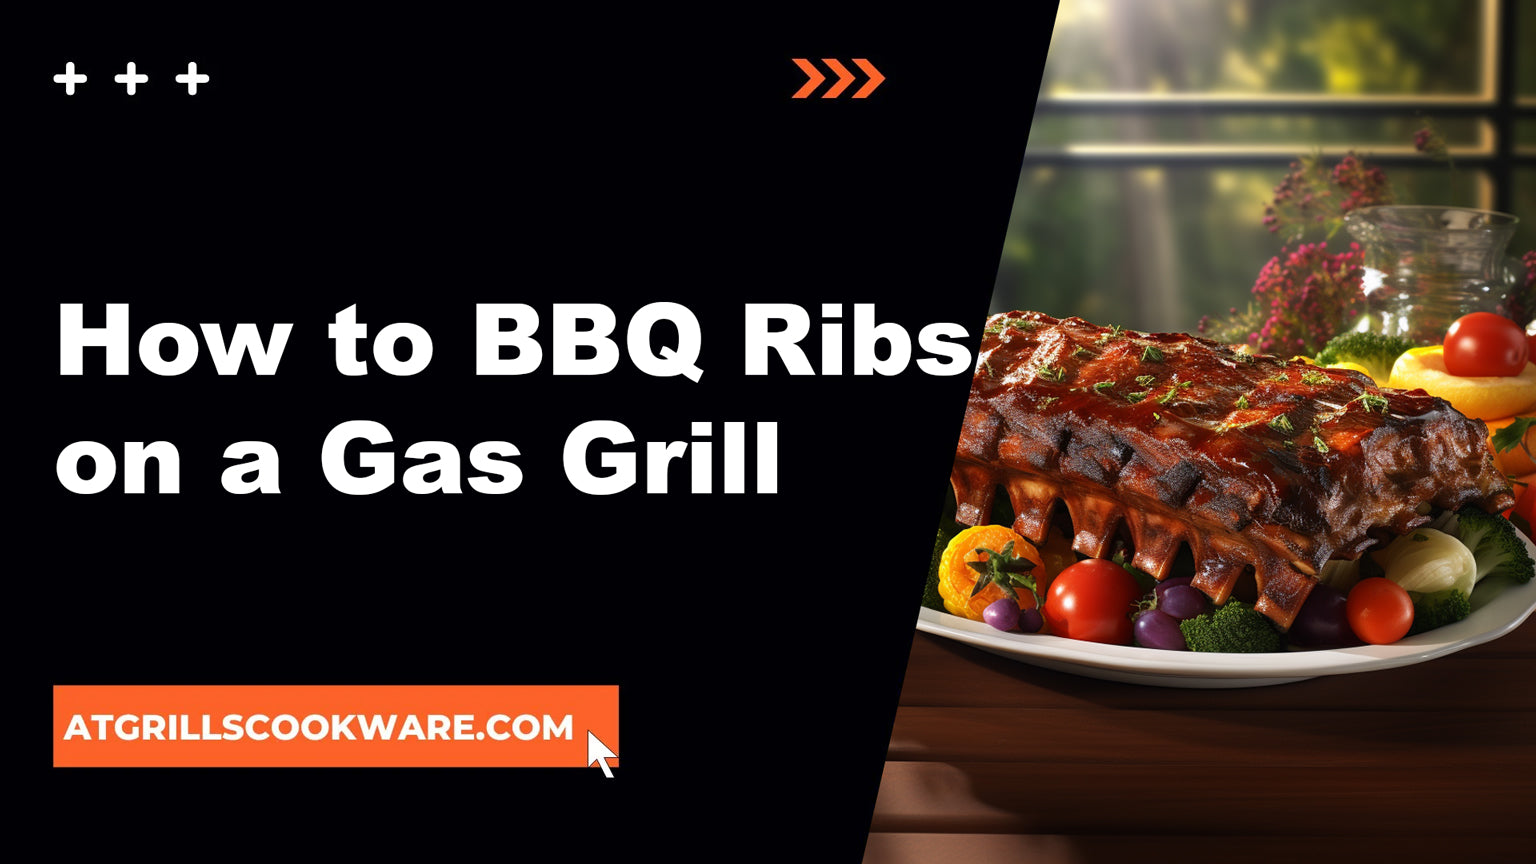 Sizzling Success: Your Ultimate Guide to BBQing Ribs on a Gas Grill